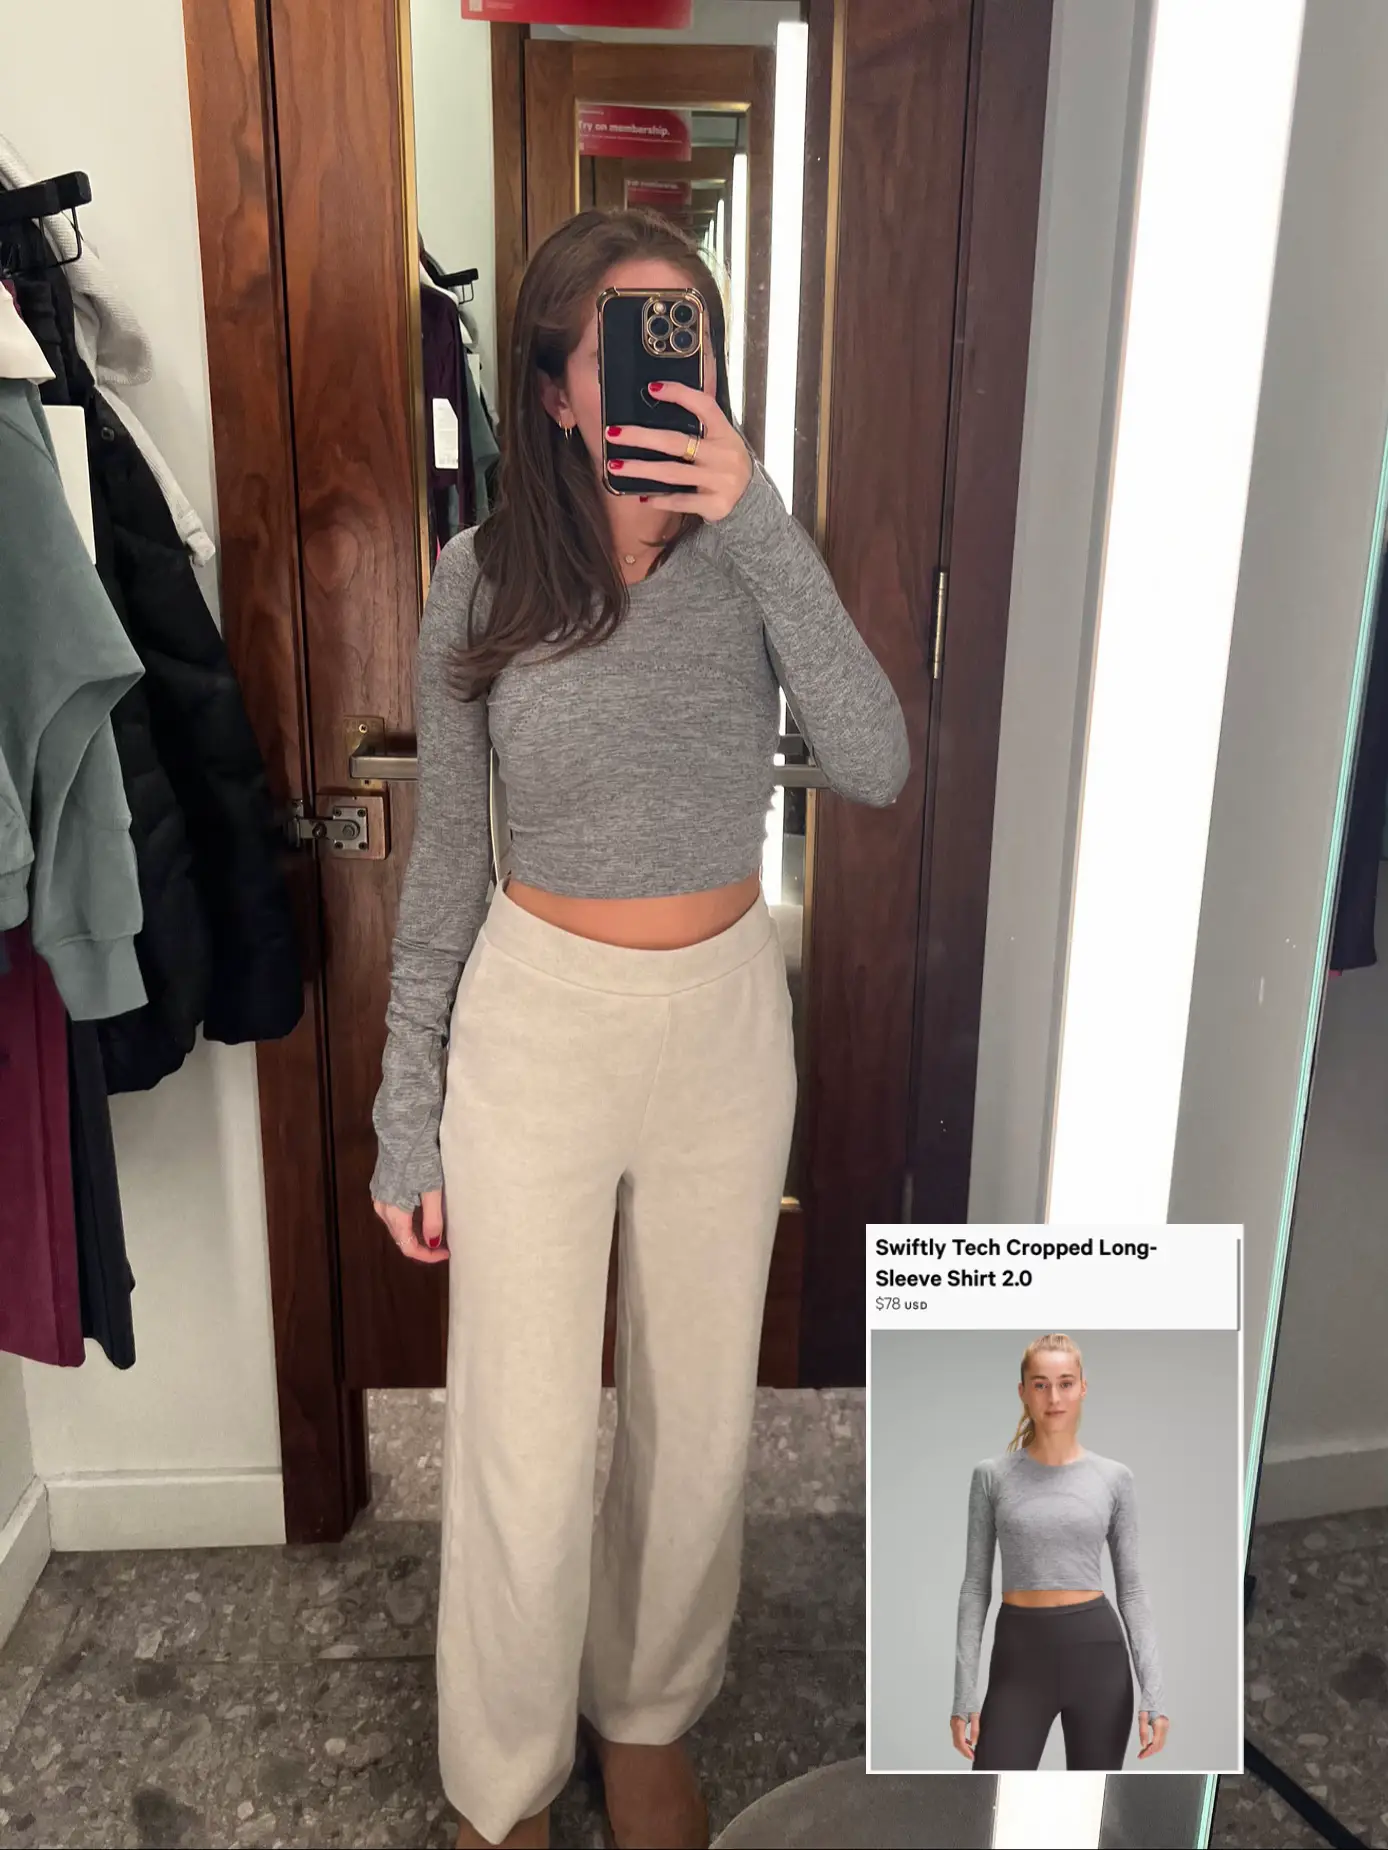 Lululemon Swiftly Tech Cropped Long-Sleeve Shirt, Gallery posted by  Jessica Ferris